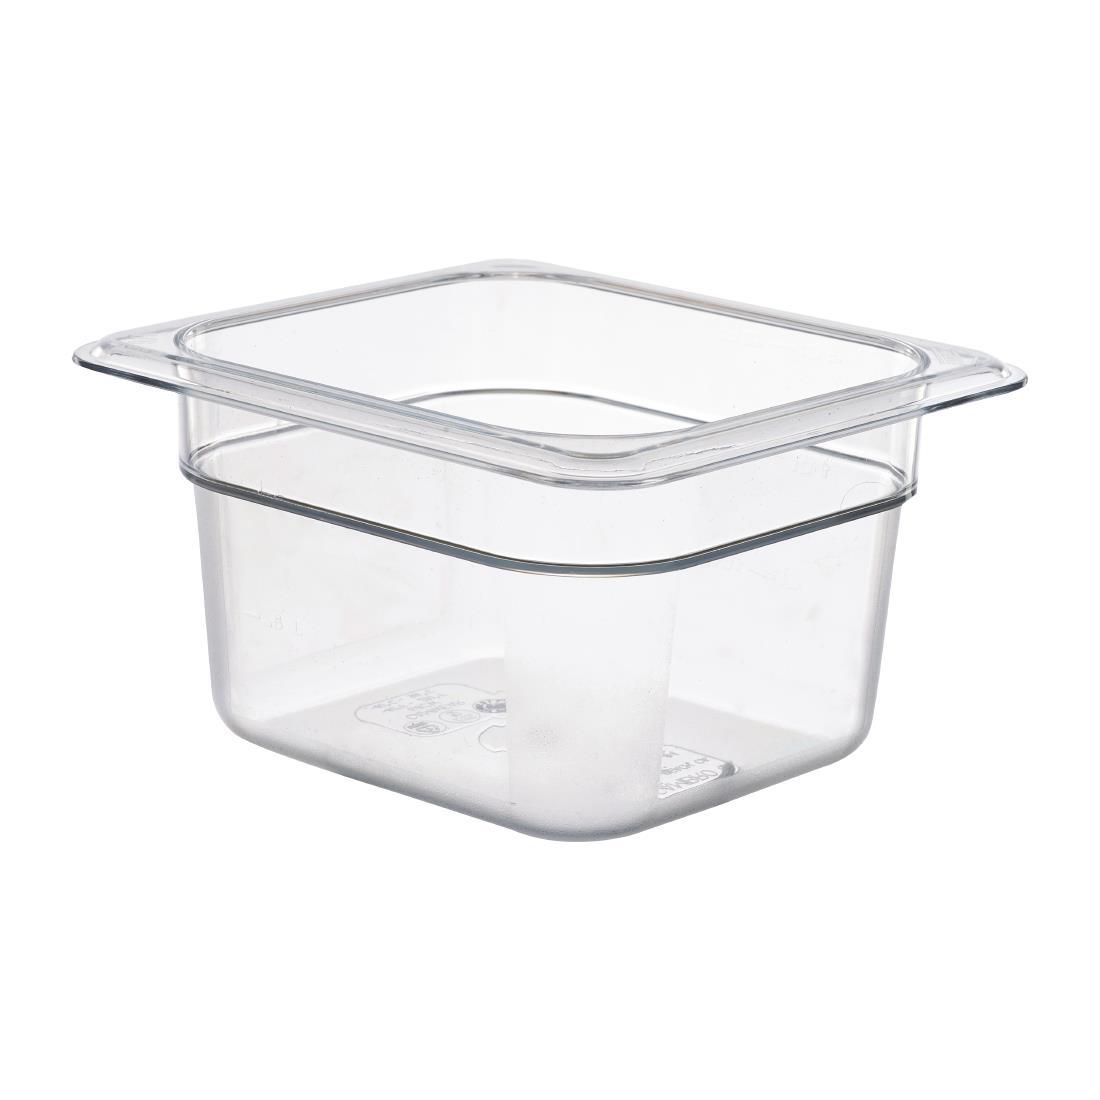 Cambro Polycarbonate 1/6 Gastronorm Pan 100mm - DM752  - 1